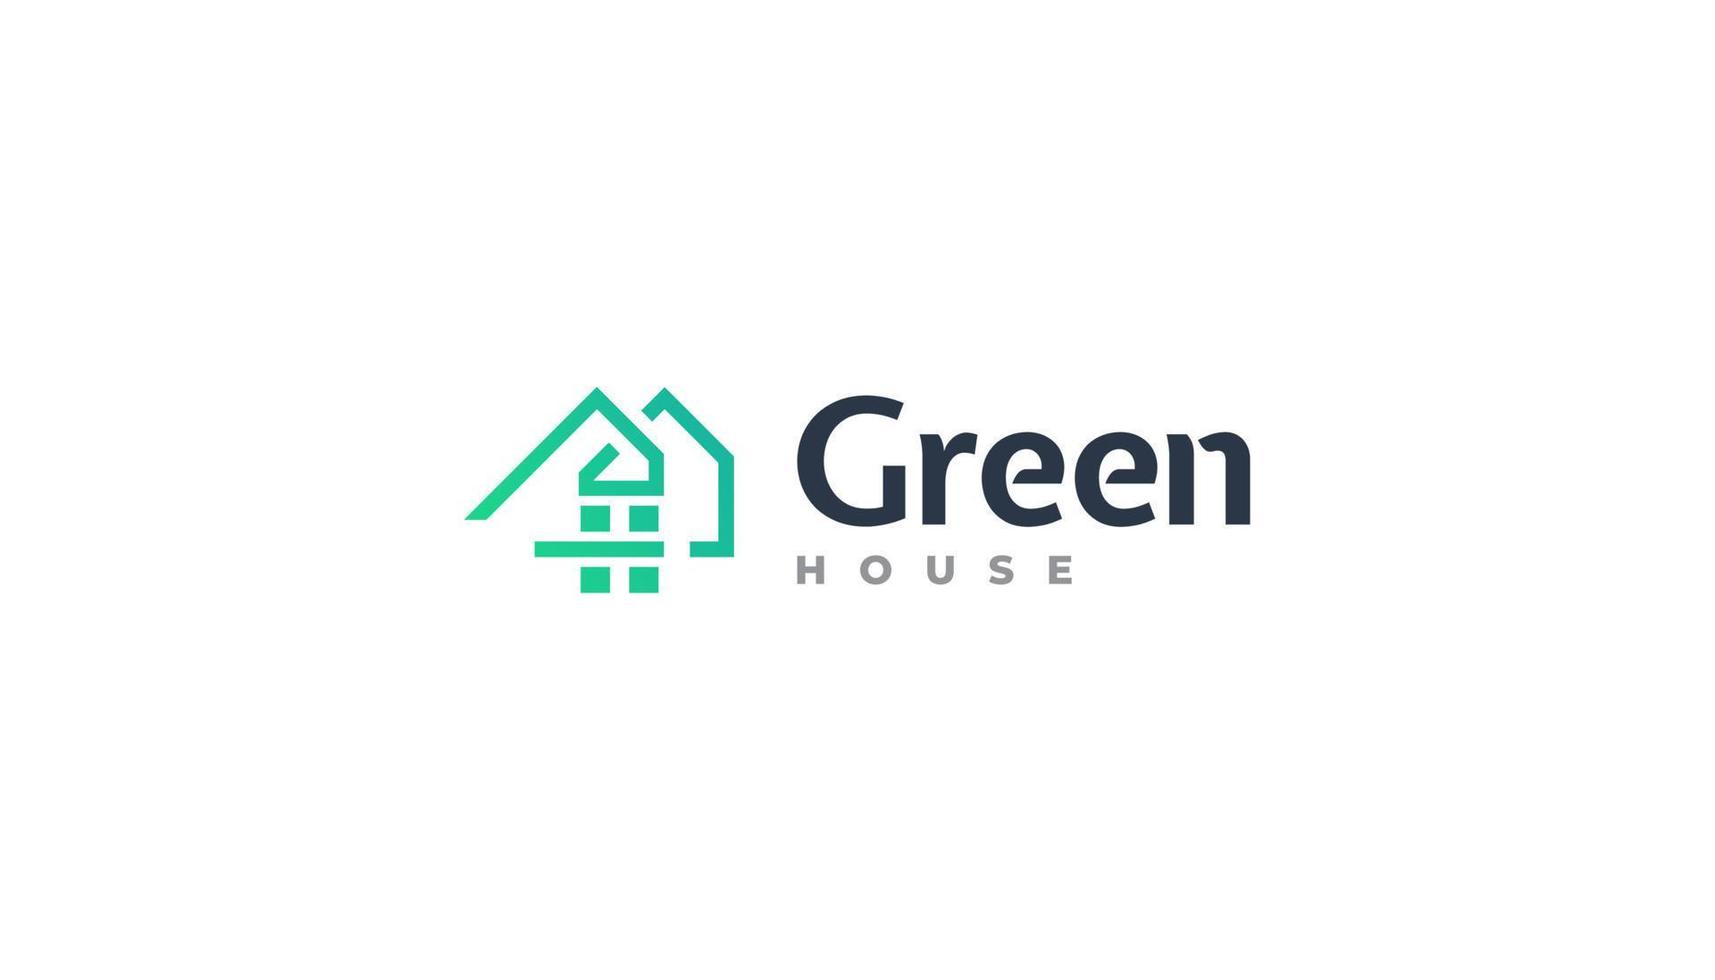 Simple and Minimalist Green House Logo with Linear Concept. Suitable for Real Estate, Construction, Architecture and Building Industry Logo vector